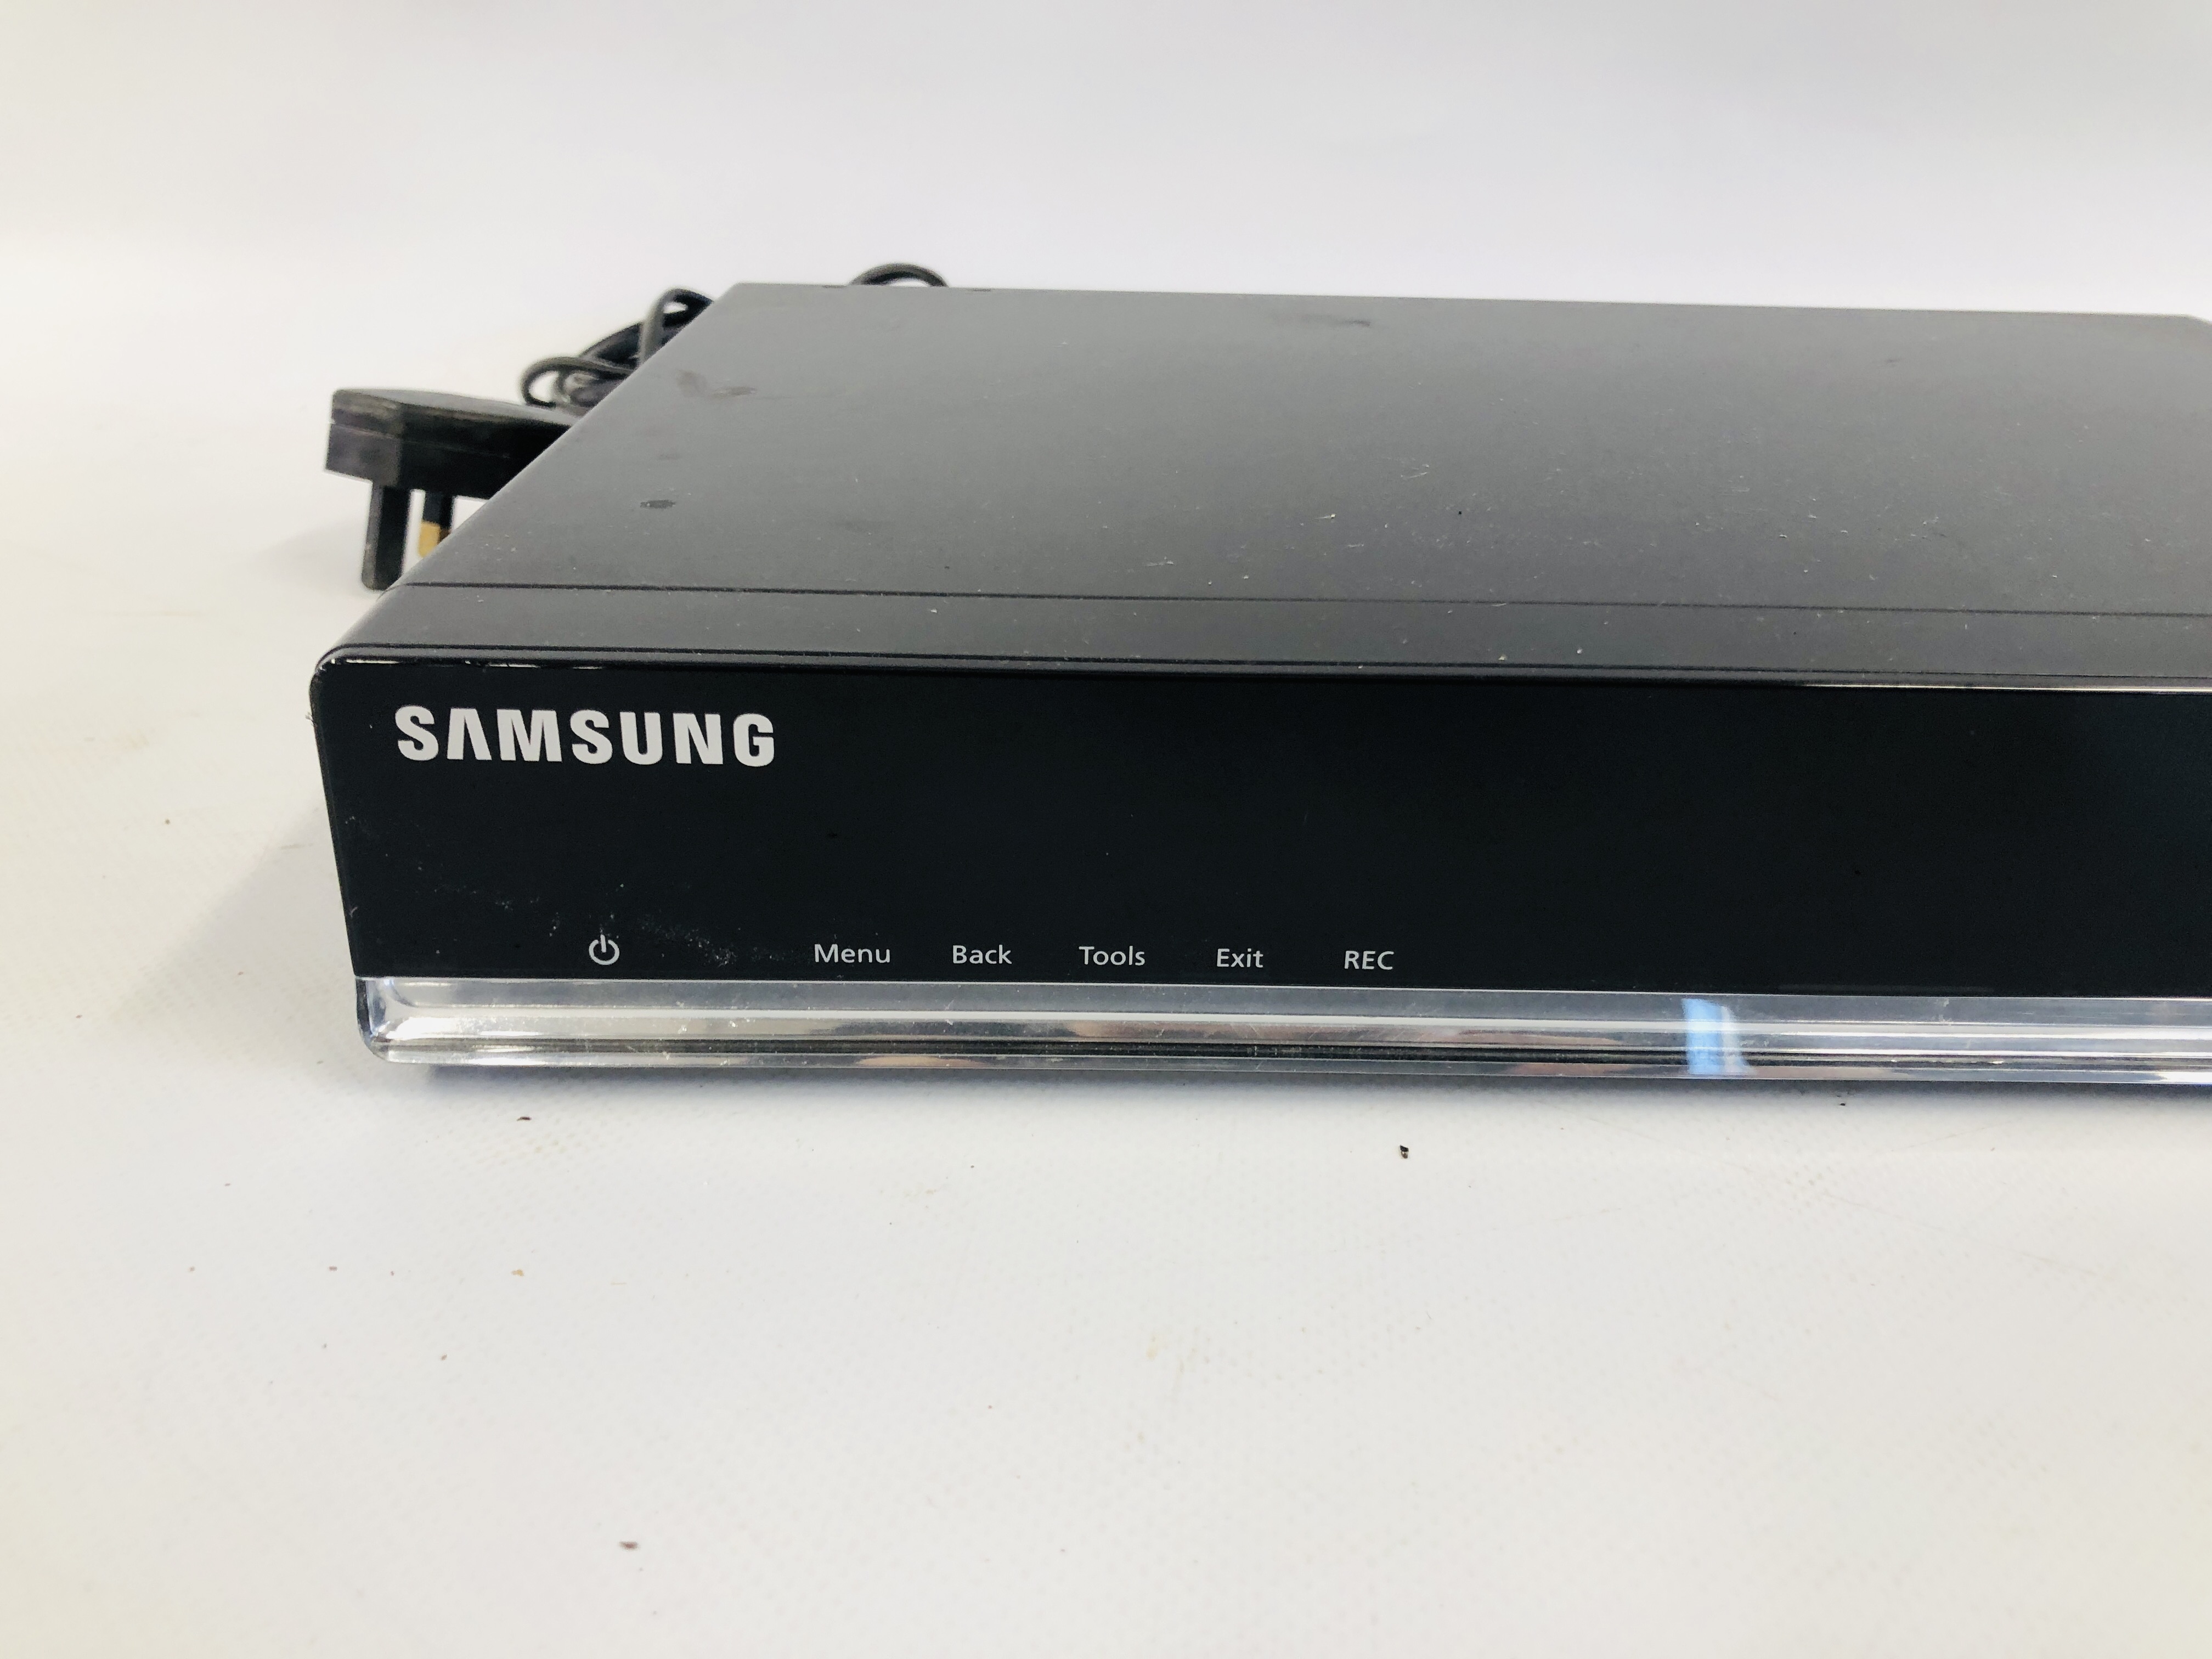 A SAMSUNG UNTRA HD BLU-RAY 3D DVD PLAYER WITH REMOTE MODEL UBD-K8500 ALONG WITH A SAMSUNG DIGITAL - Image 2 of 5